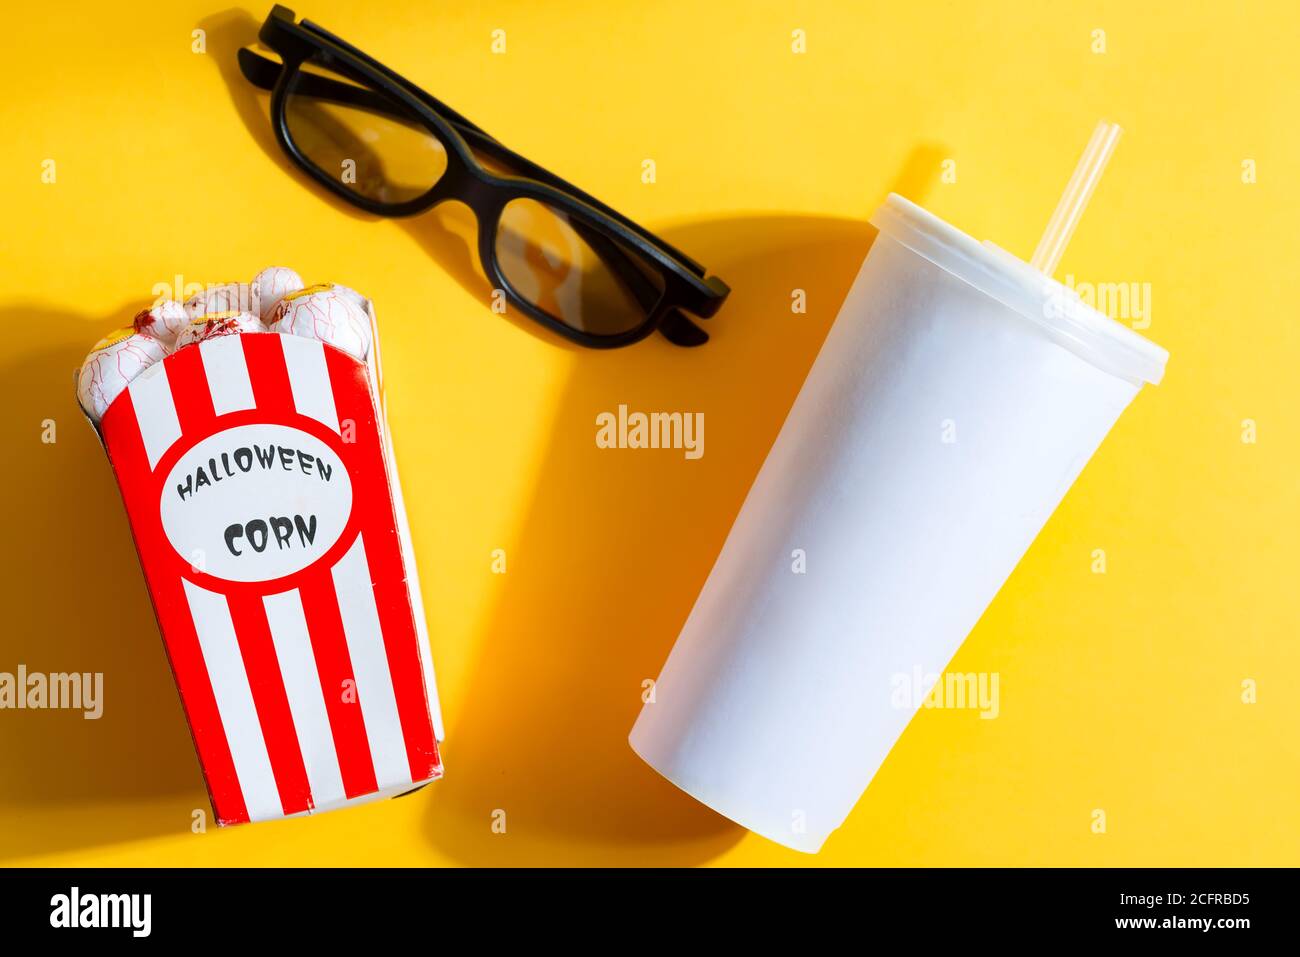 Accessories for watching films and movies at home - glasses, Halloween corn in the shapes of eyeballs and paper cup with drink on a yellow background, Stock Photo